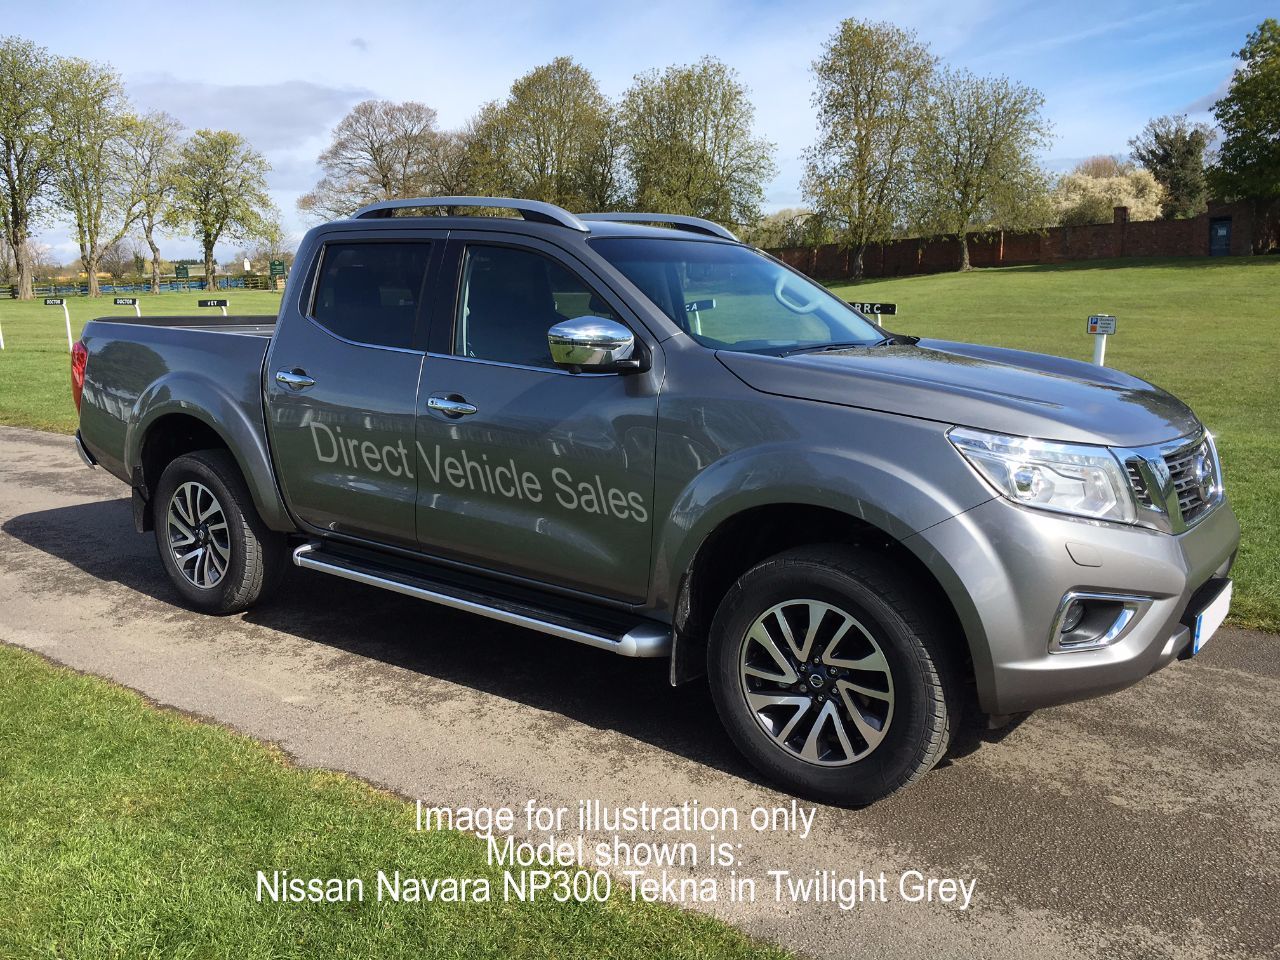 Nissan dealers in north yorkshire #10